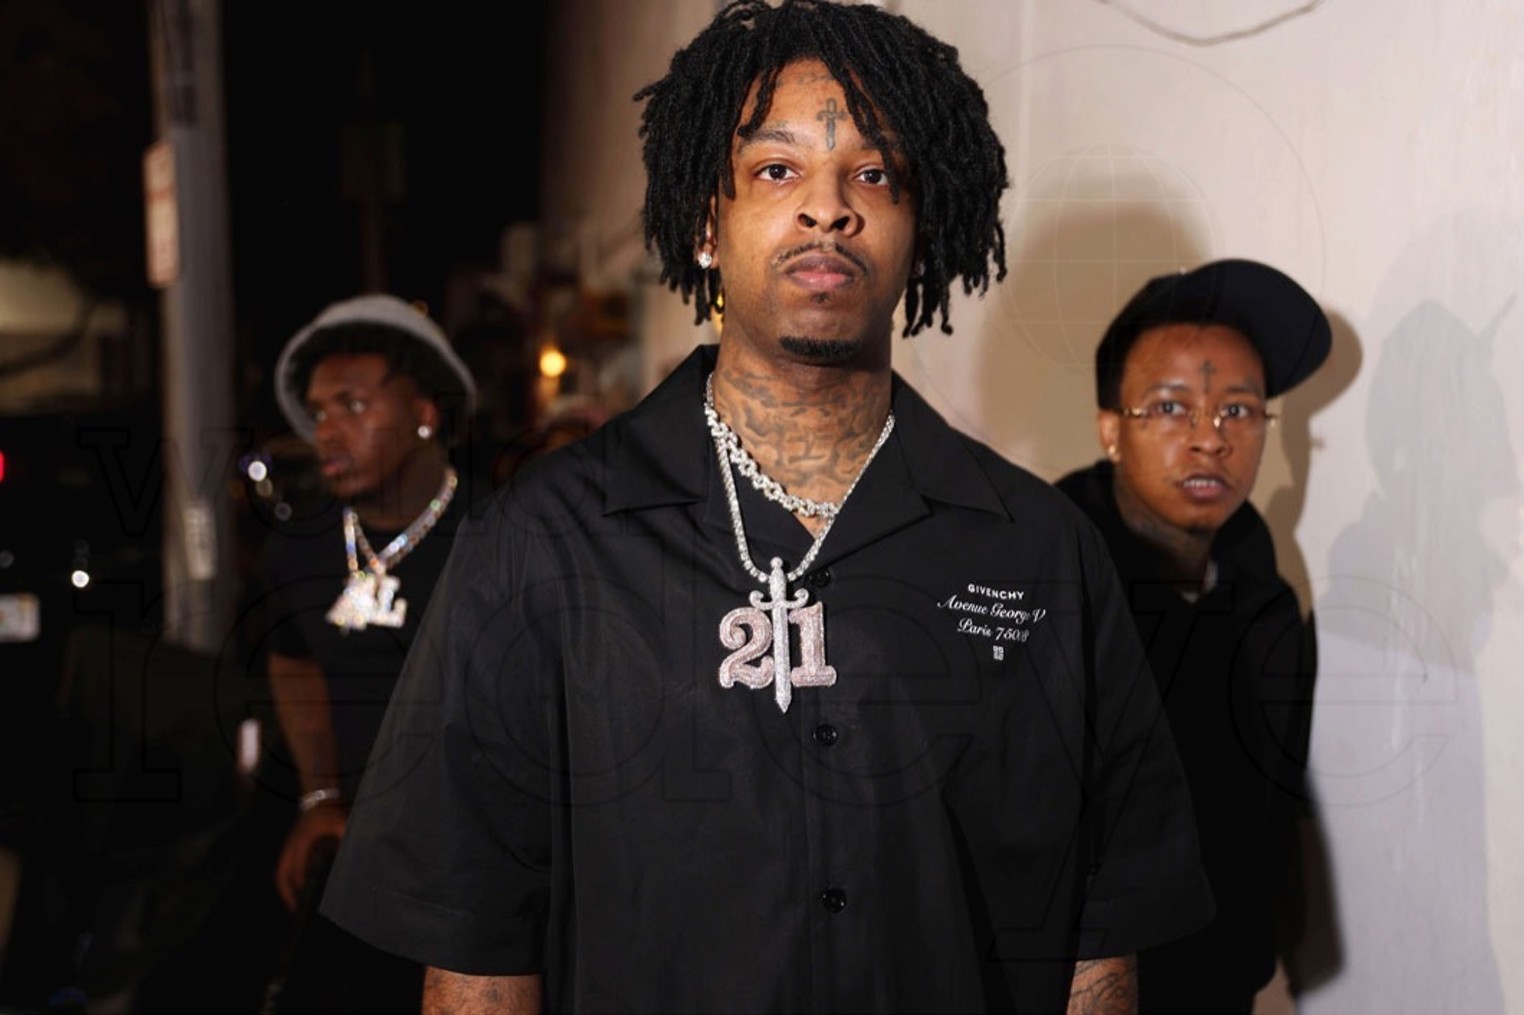 21 Savage To Perform At Michelob ULTRA Art Basel Experience –